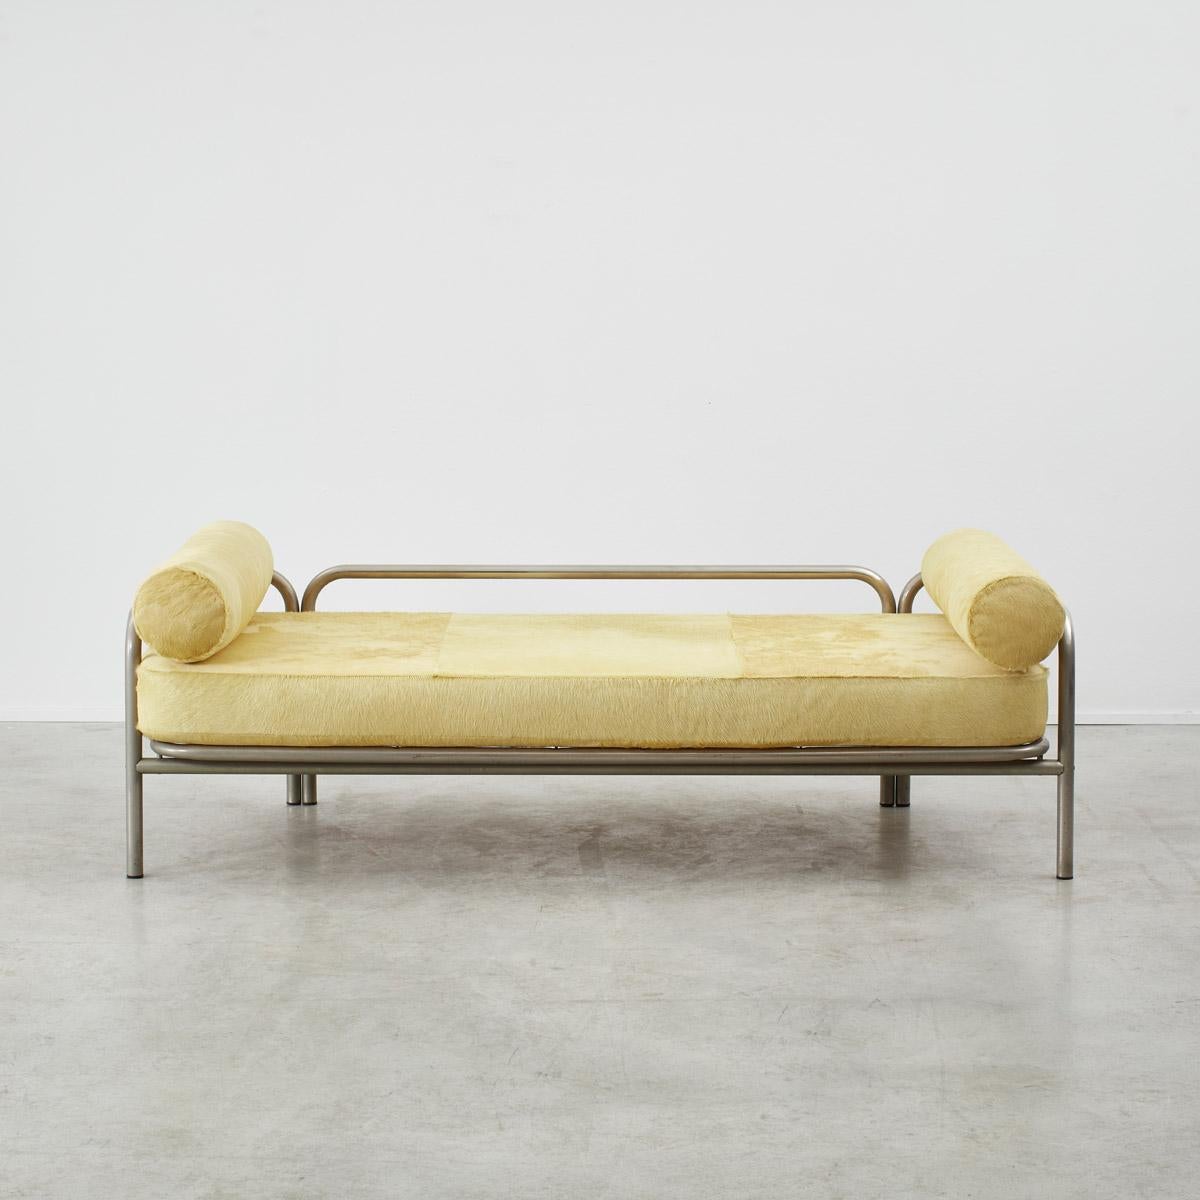 Mid-20th Century Gae Aulenti Locus Solus daybed for Poltronova, Italy 1964 For Sale